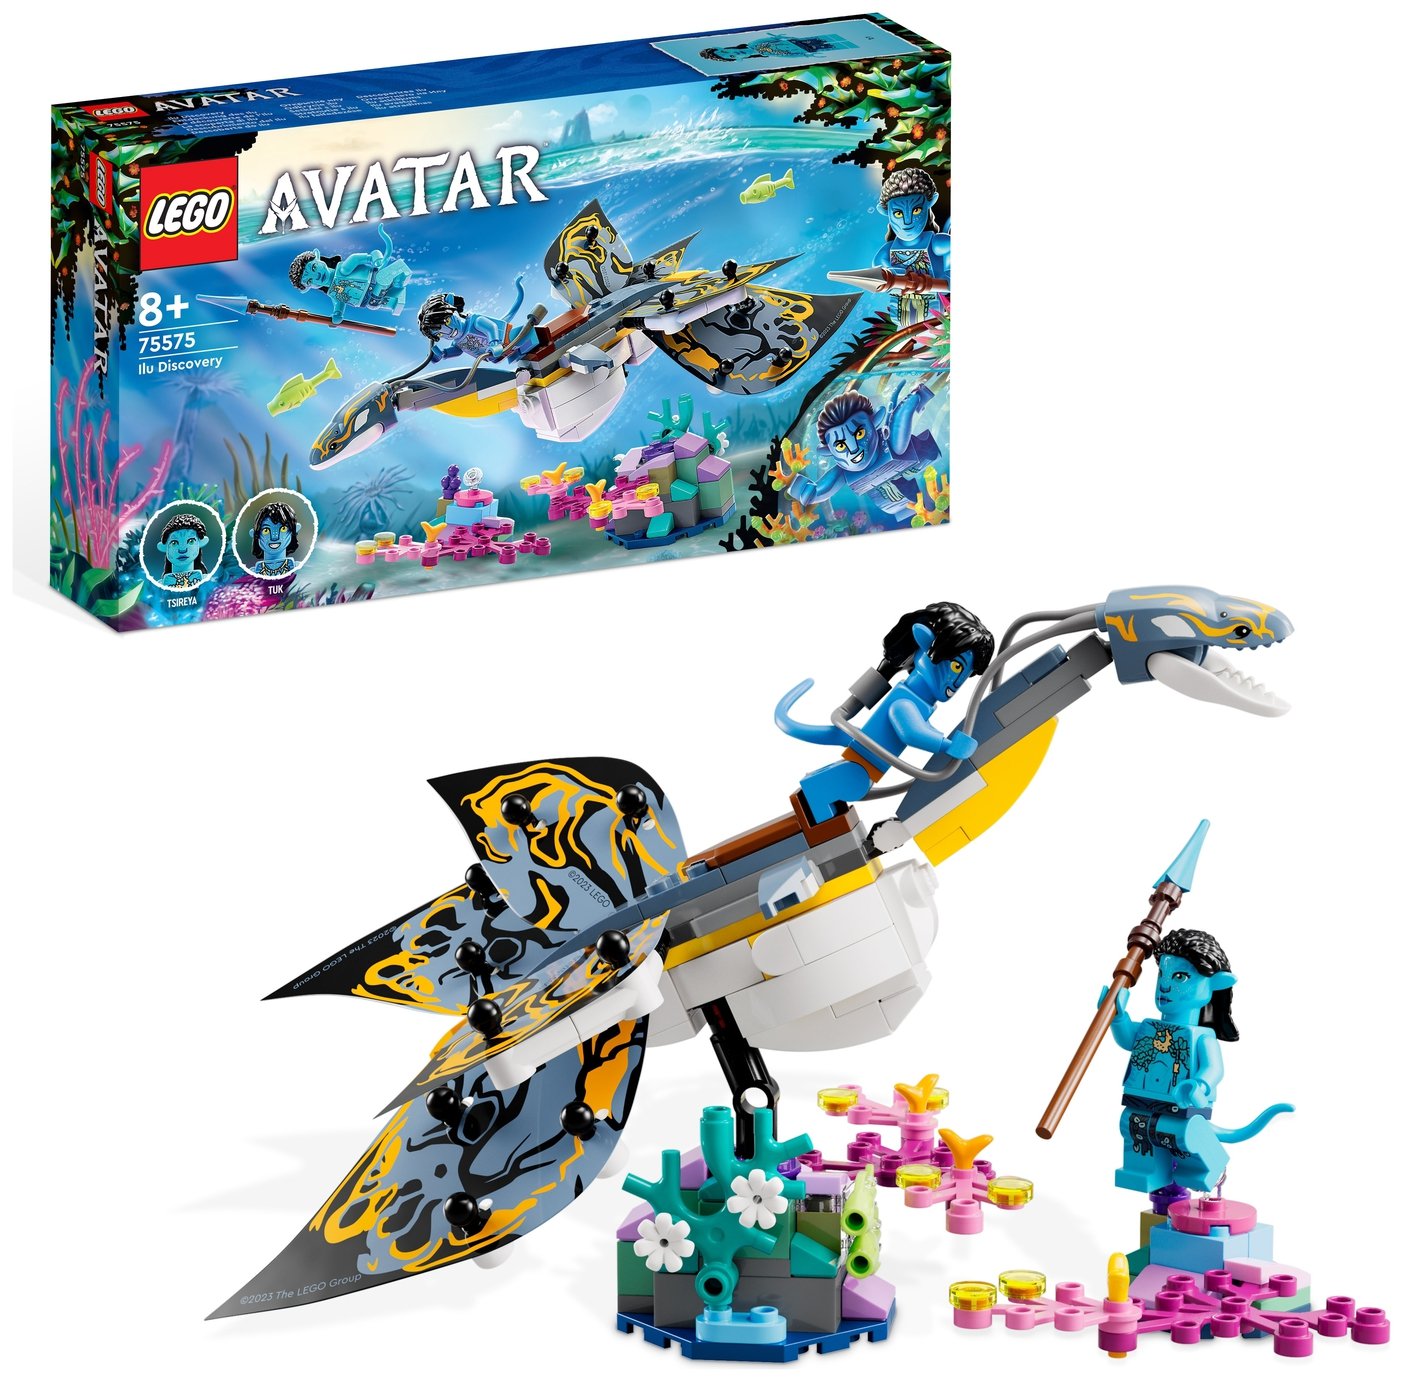 LEGO Avatar Ilu Discovery The Way of Water Figure Set 75575